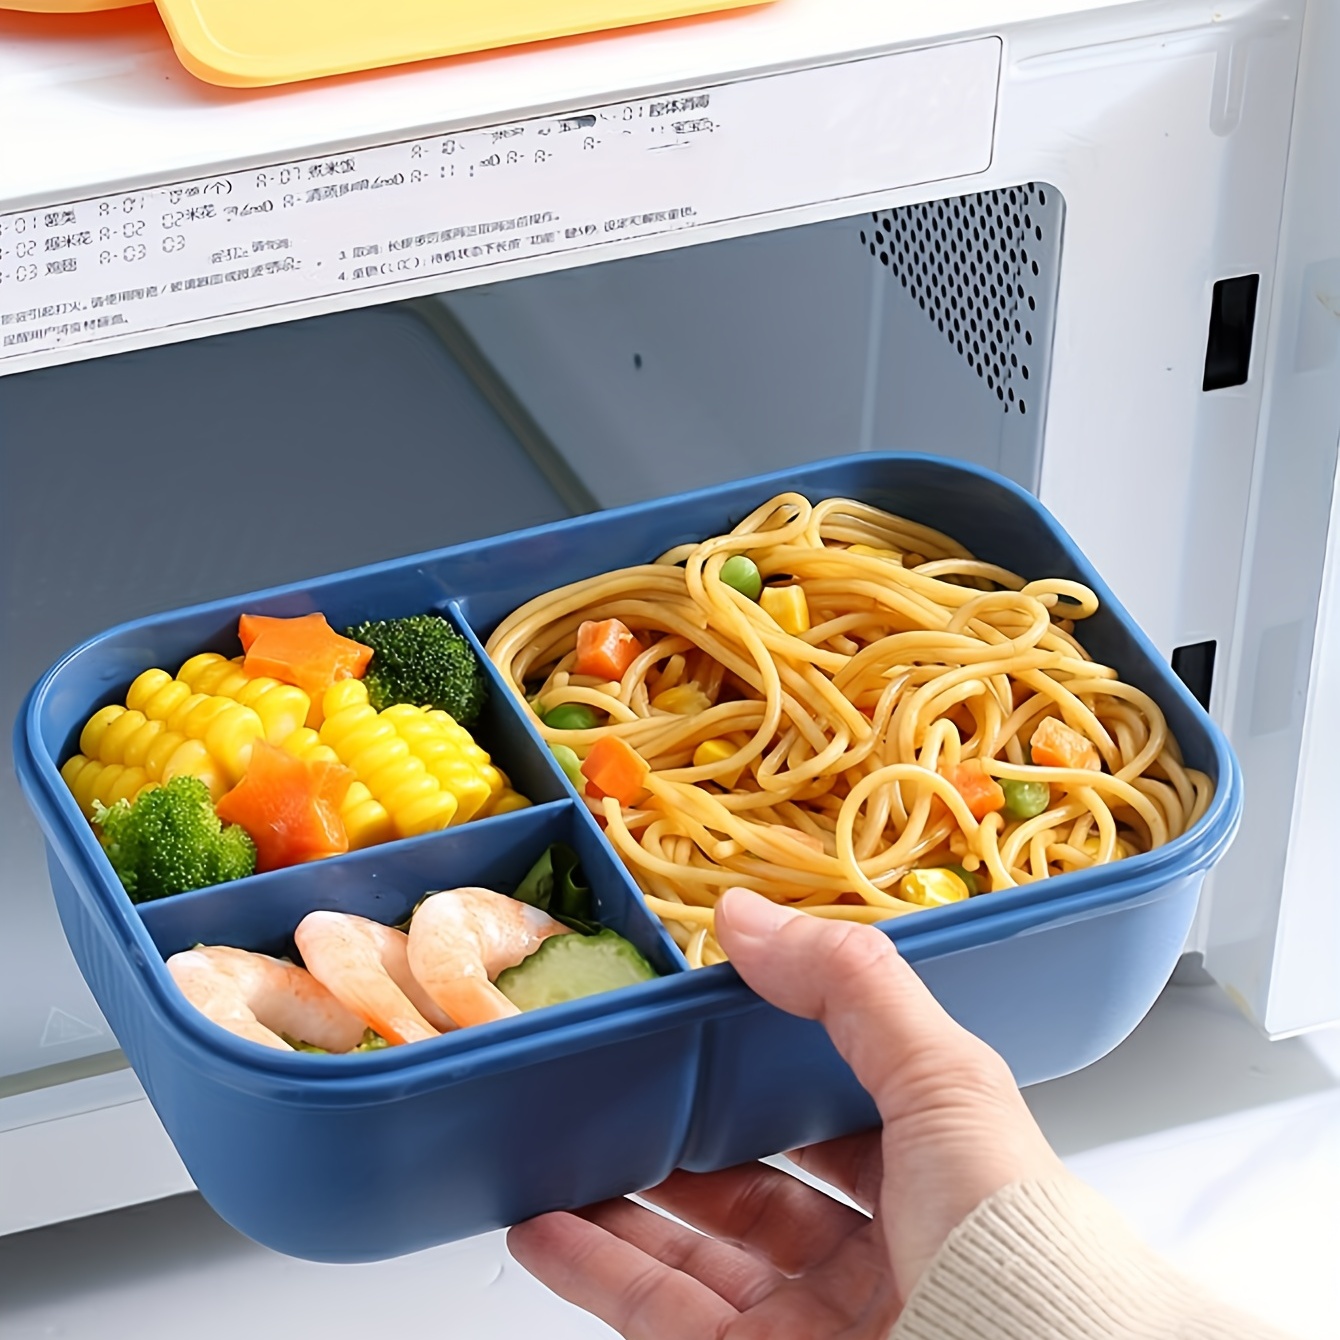 DaCool Kids Bento Box Toddler Lunch Box for Kids 7.5 Cup 4-Compartment  Leakproof with Fork Spoon Sch…See more DaCool Kids Bento Box Toddler Lunch  Box